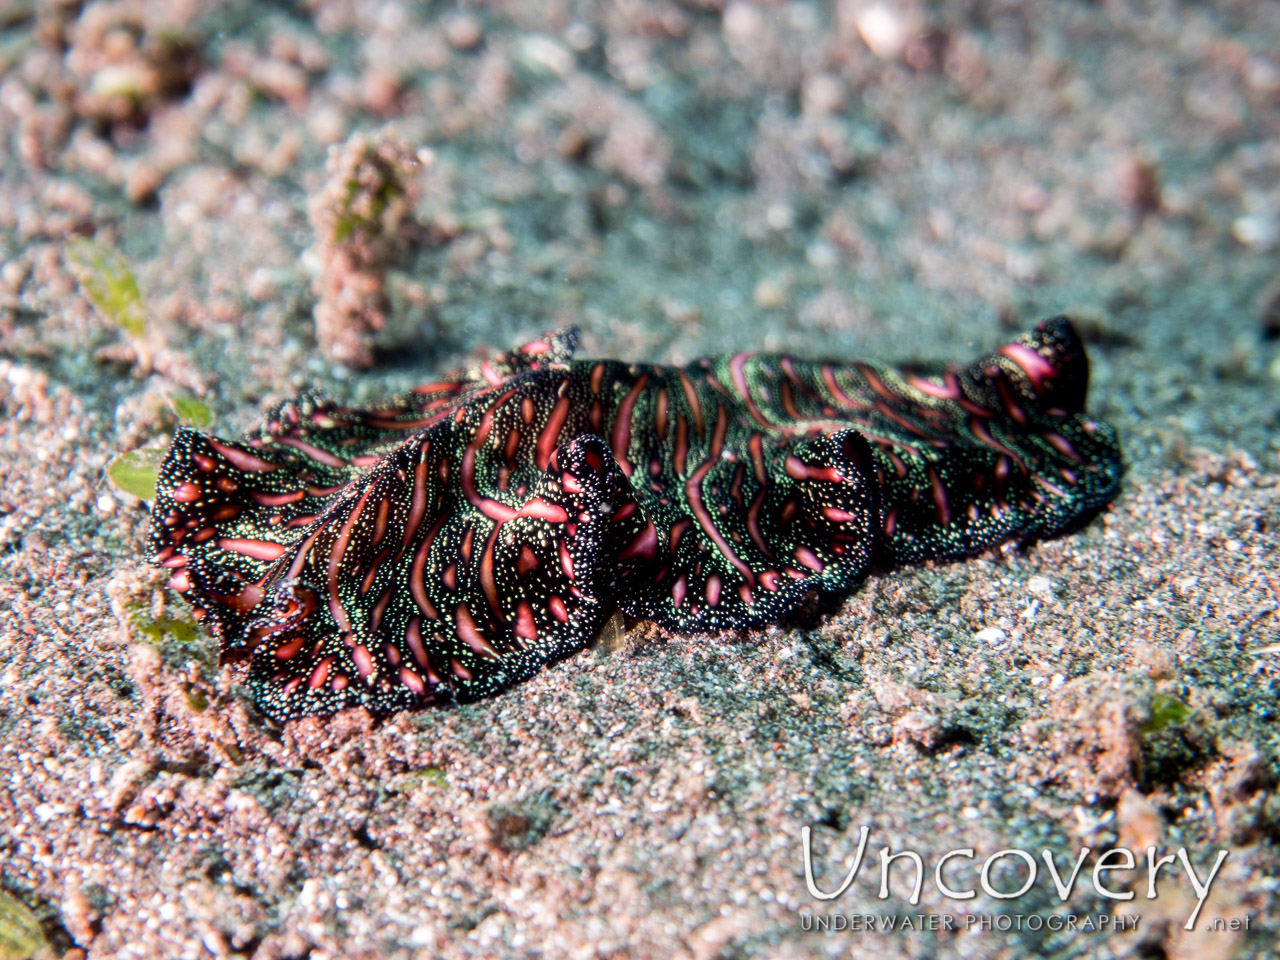 Polyclad Flatworm, photo taken in Indonesia, North Sulawesi, Lembeh Strait, Aer Bajo 1